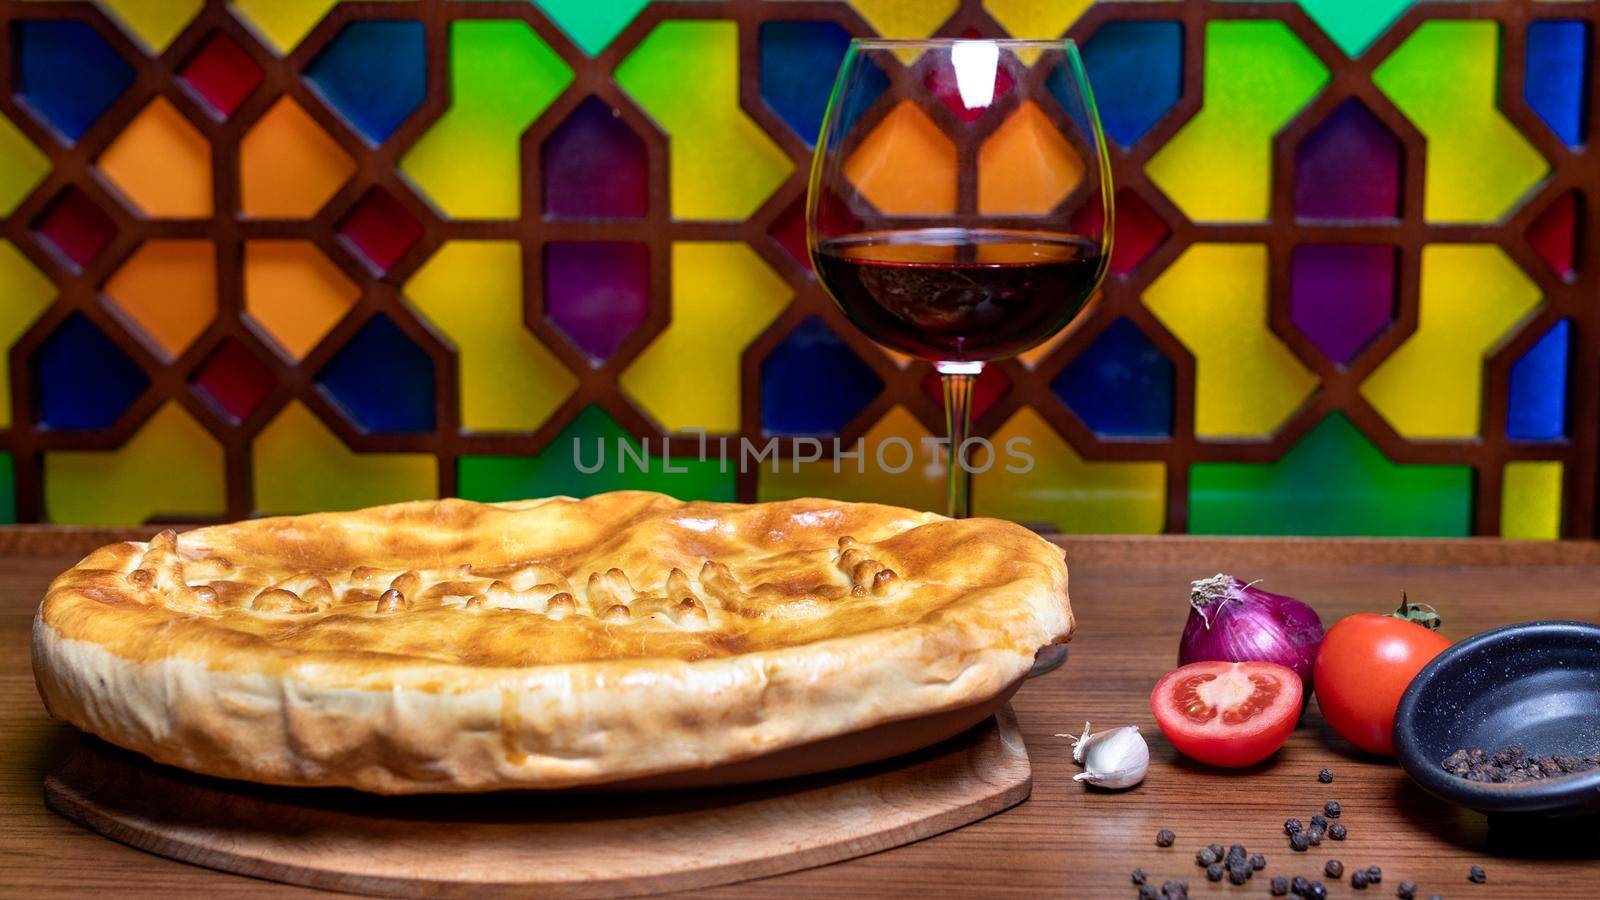 Tasty meat meal with bread, wine glass by ferhad